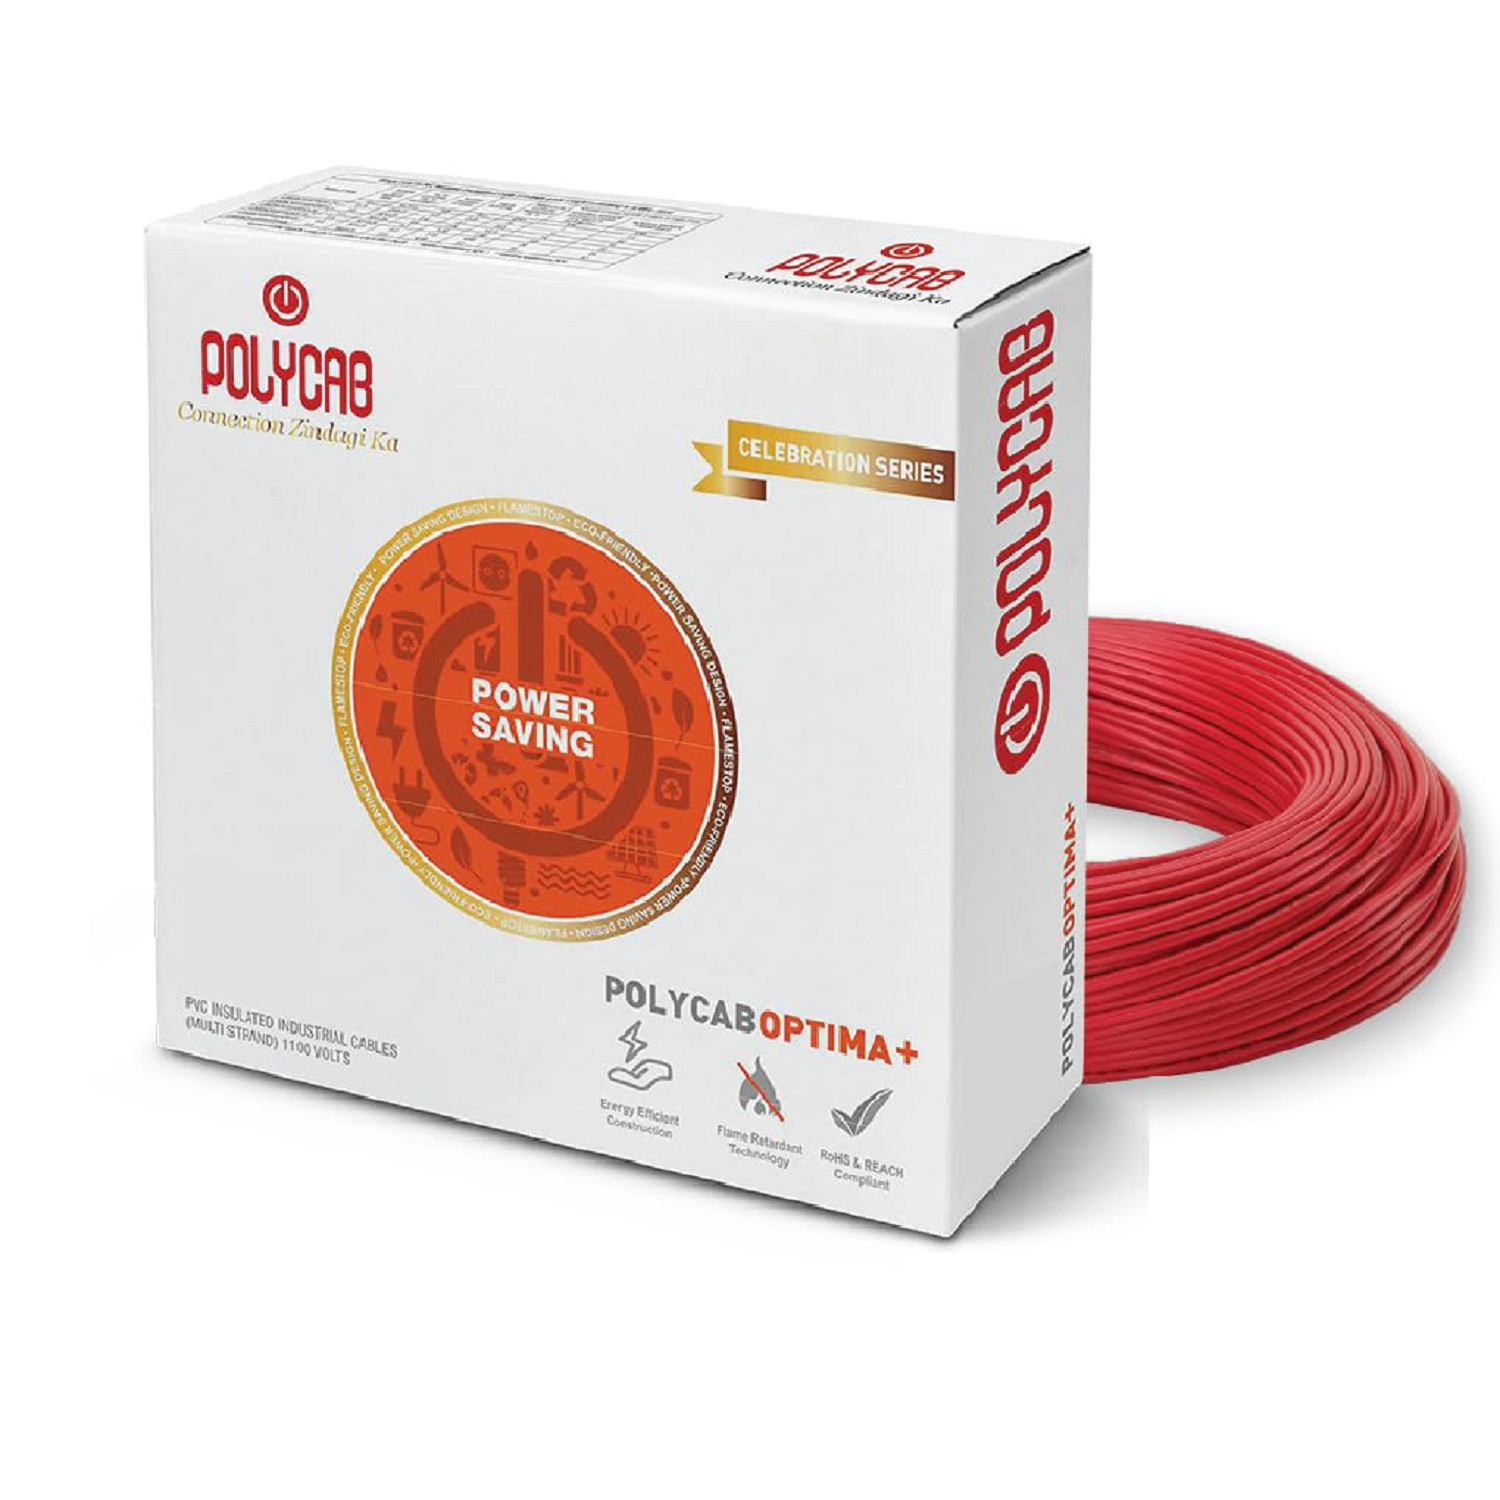 Polycab Optima Plus FR-LF 1.5 SQ-MM, 90 Meters PVC Insulated Copper Wire Single Core (Red)